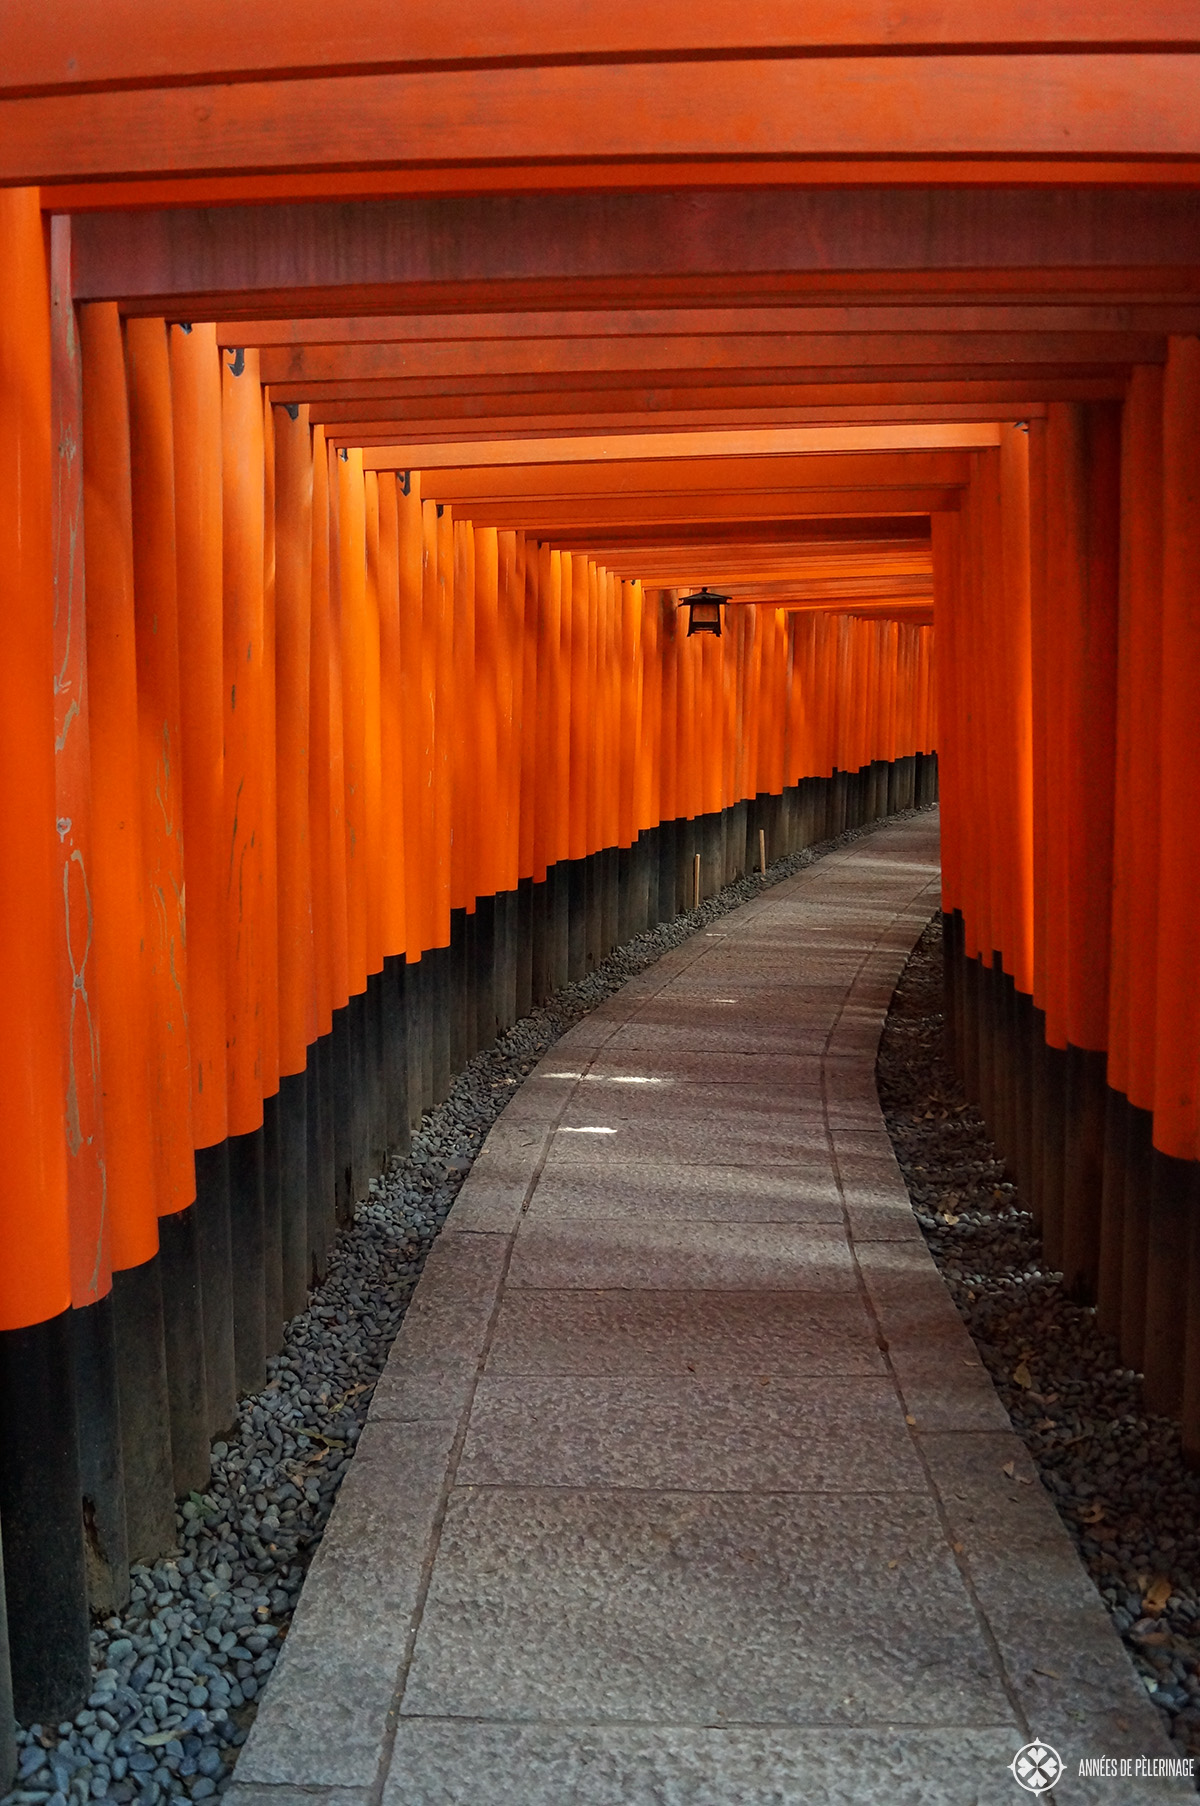 The red tunnels at the Fushimi Inari Shrine in Kyoto